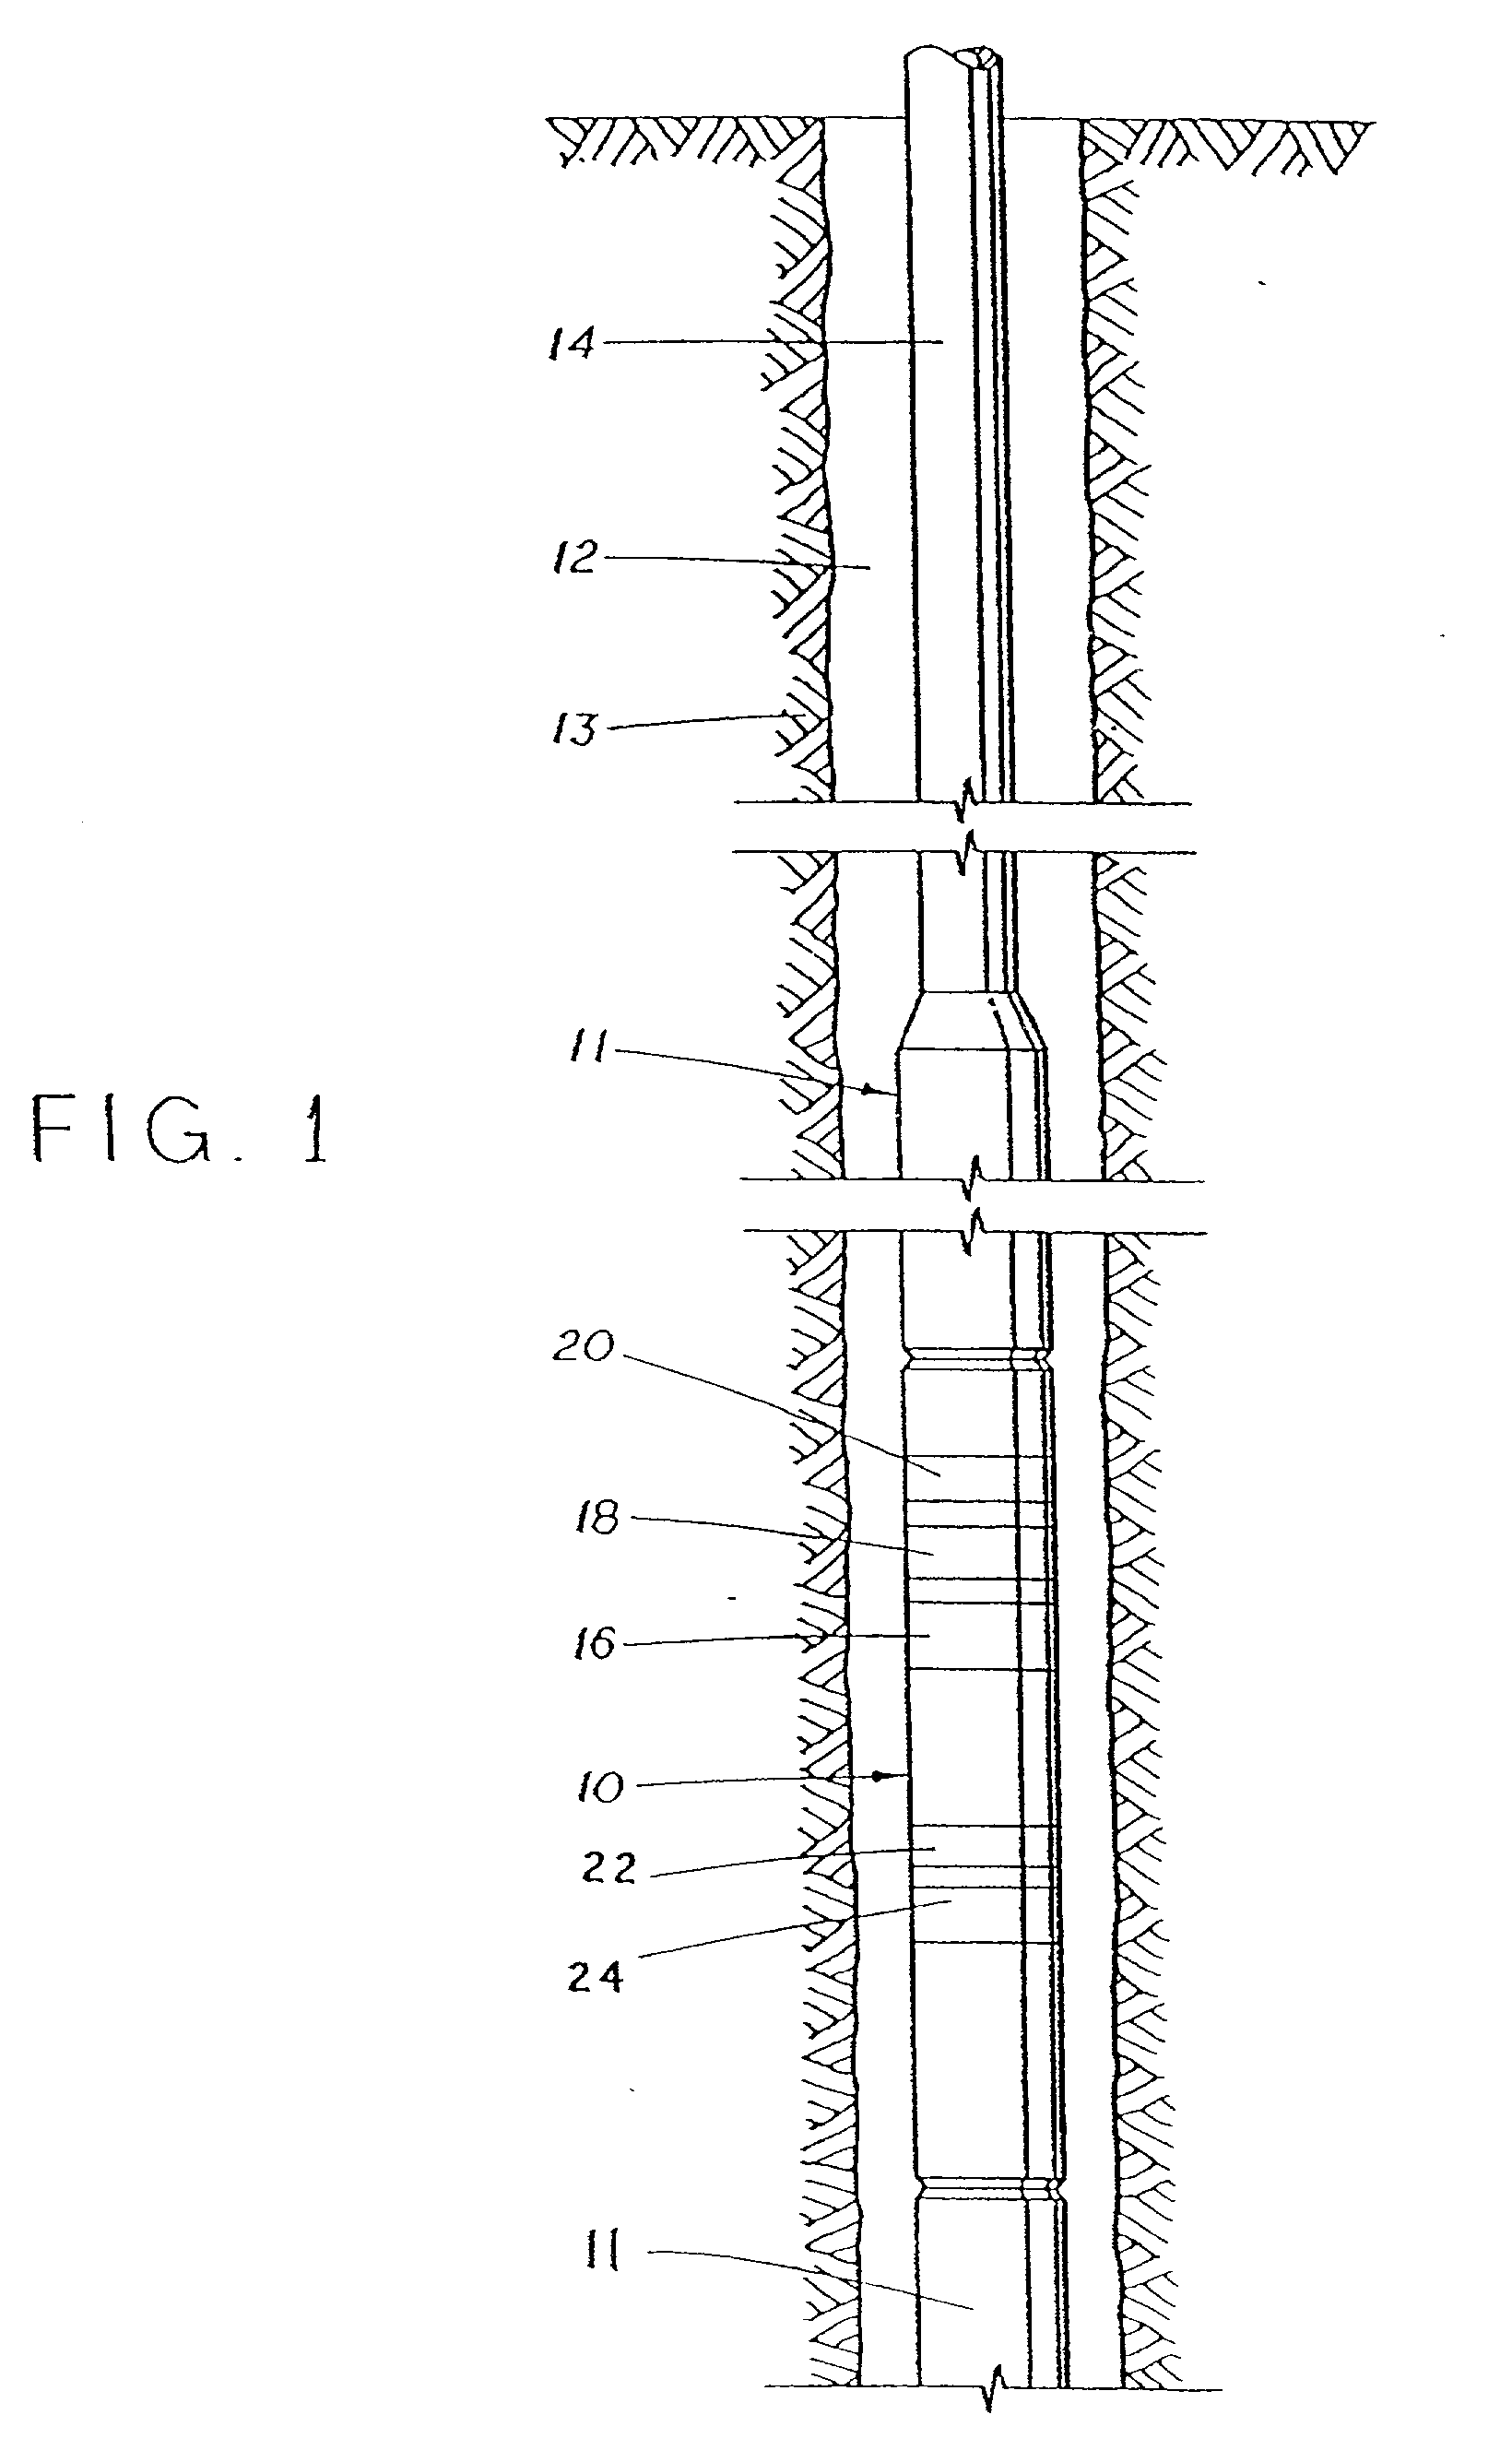 Electromagnetic wave resistivity tool having a tilted antenna for geosteering within a desired payzone